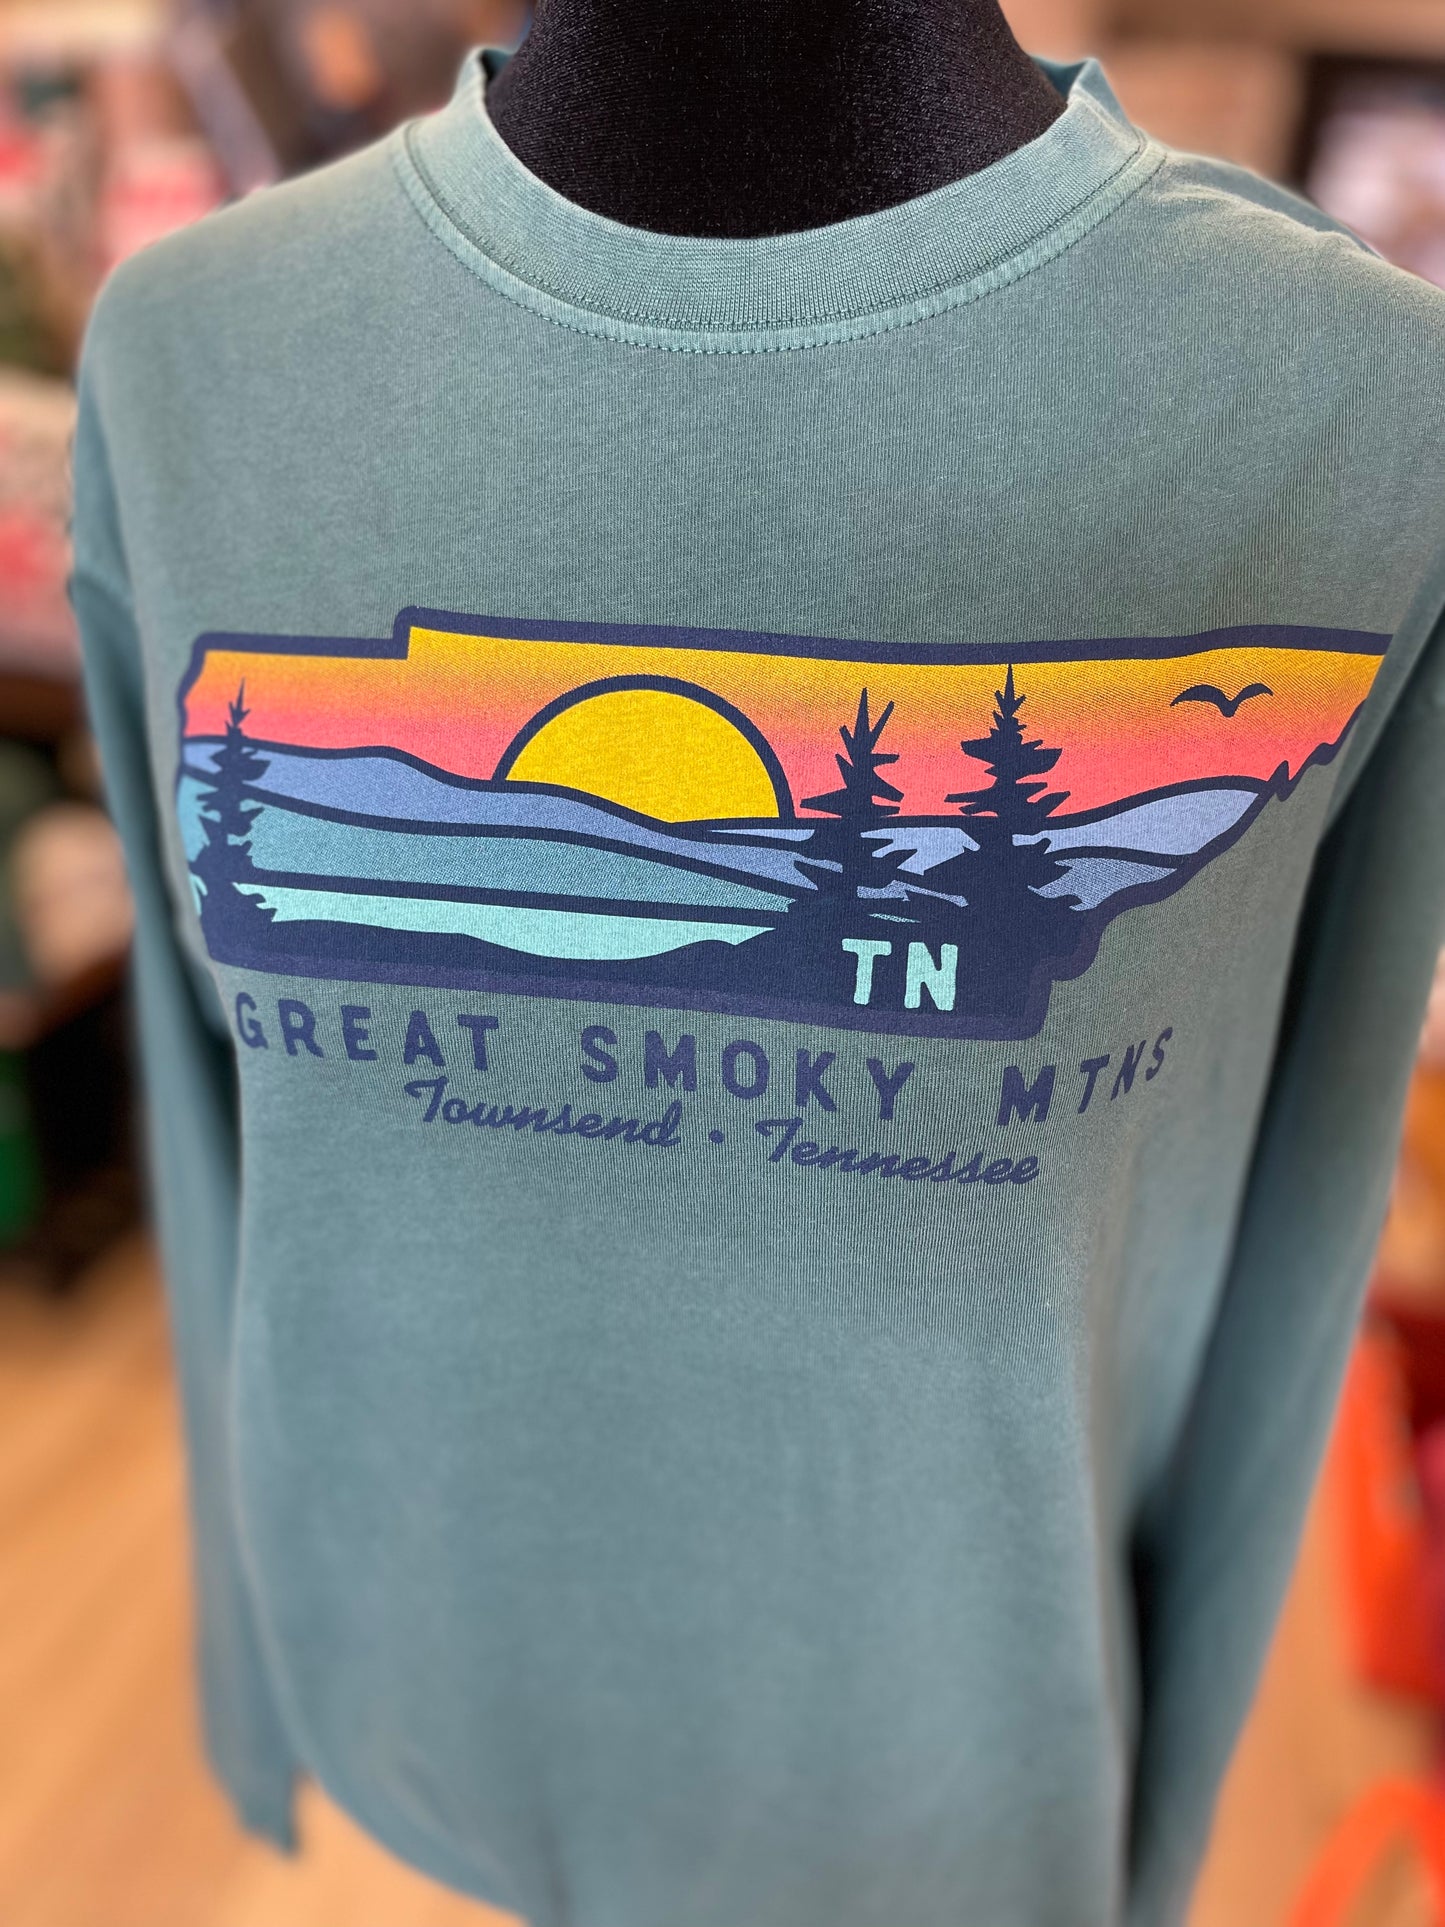 Great Smoky Mountains - Townsend, TN - State Long Sleeve Shirt